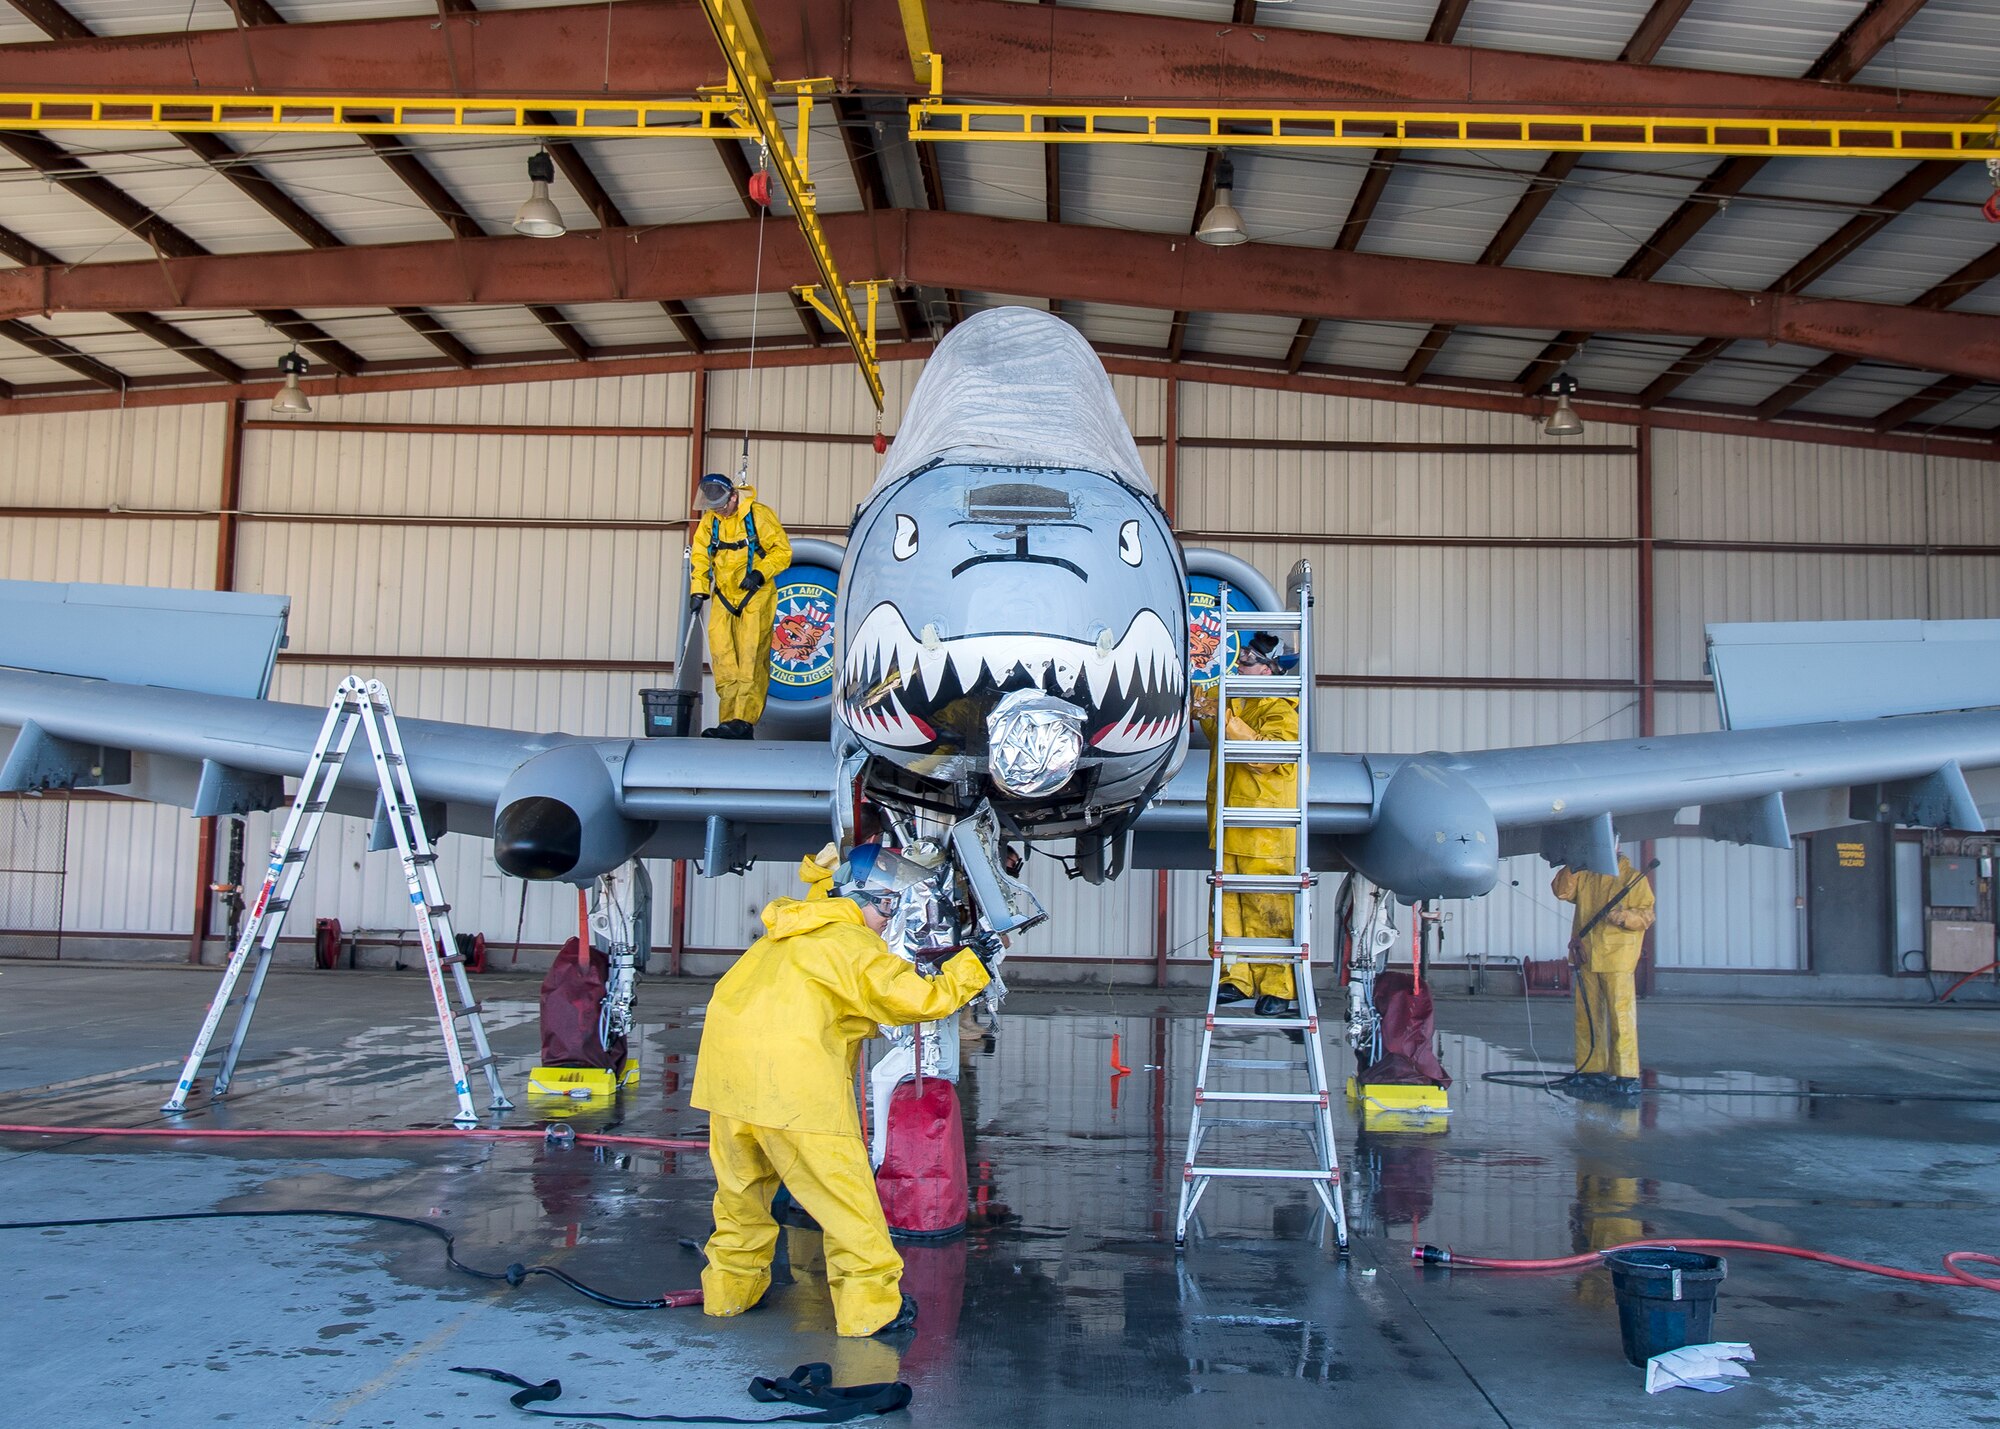 Airmen from the 23d Maintenance Group wash an A-10C Thunderbolt II, Feb. 25, 2019, at Moody Air Force Base, Ga. On top of their daily scheduled maintenance a team of six Airmen dedicated over 10 hours washing the A-10 to ensure the aircraft was free of any surface or structural deficiencies that could present a safety hazard during flight. (U.S. Air Force photo by Airman 1st Class Eugene Oliver)